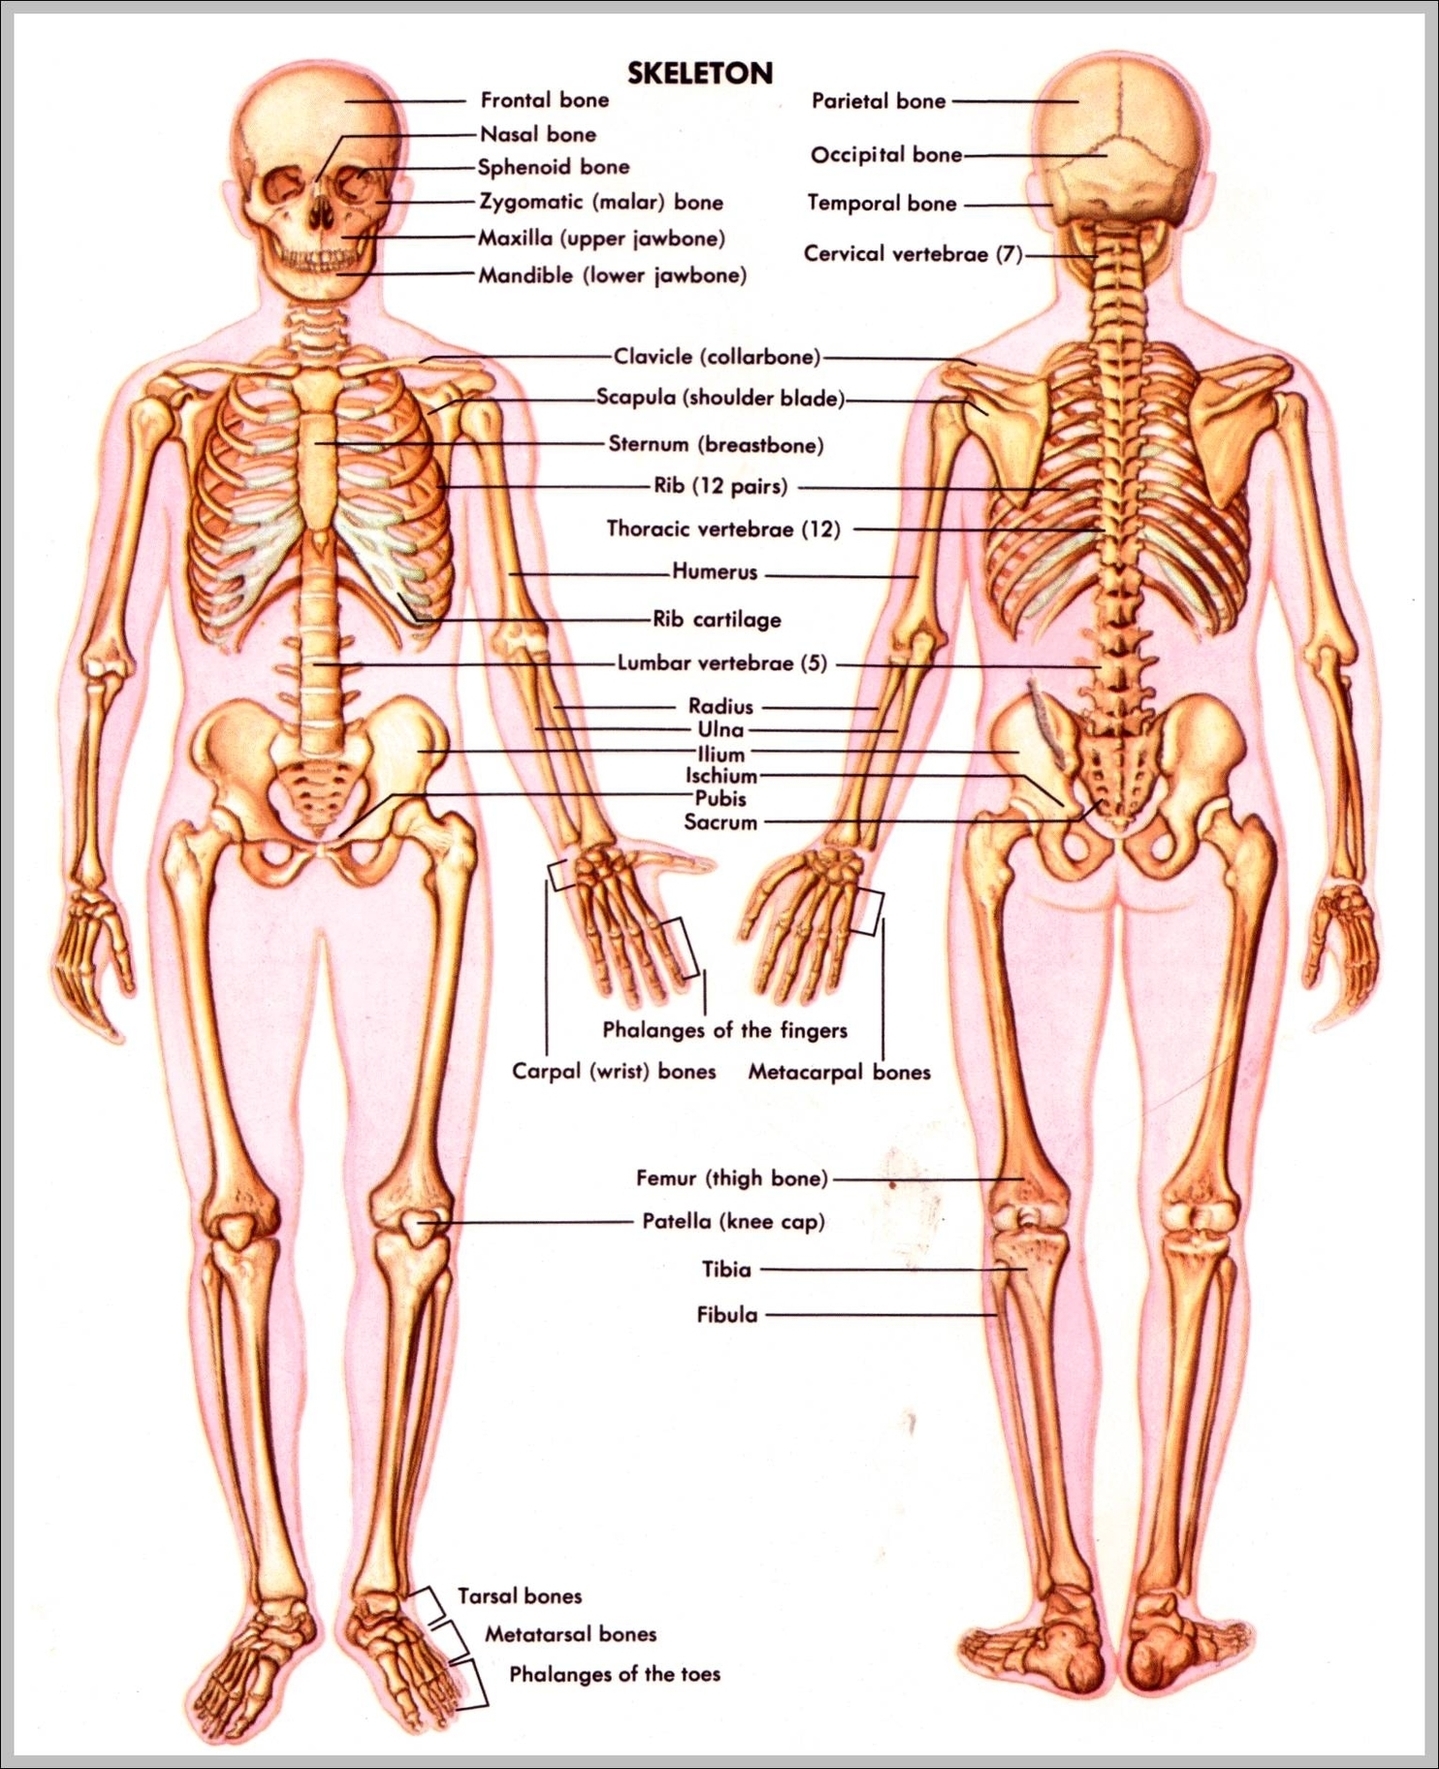 Images Of The Skeletal System Image